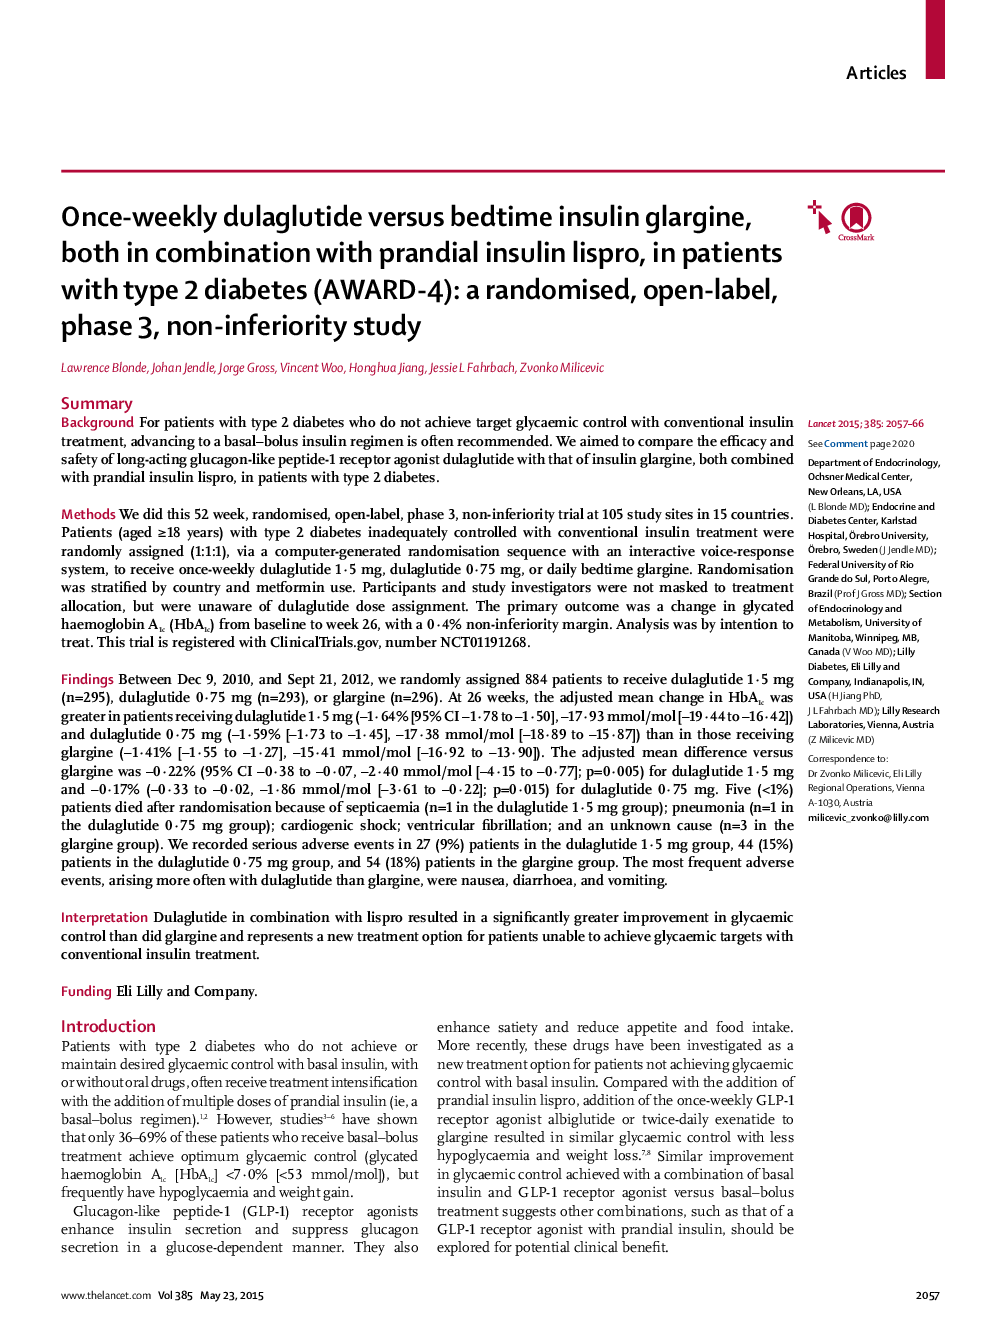 Once-weekly dulaglutide versus bedtime insulin glargine, both in combination with prandial insulin lispro, in patients with type 2 diabetes (AWARD-4): a randomised, open-label, phase 3, non-inferiority study